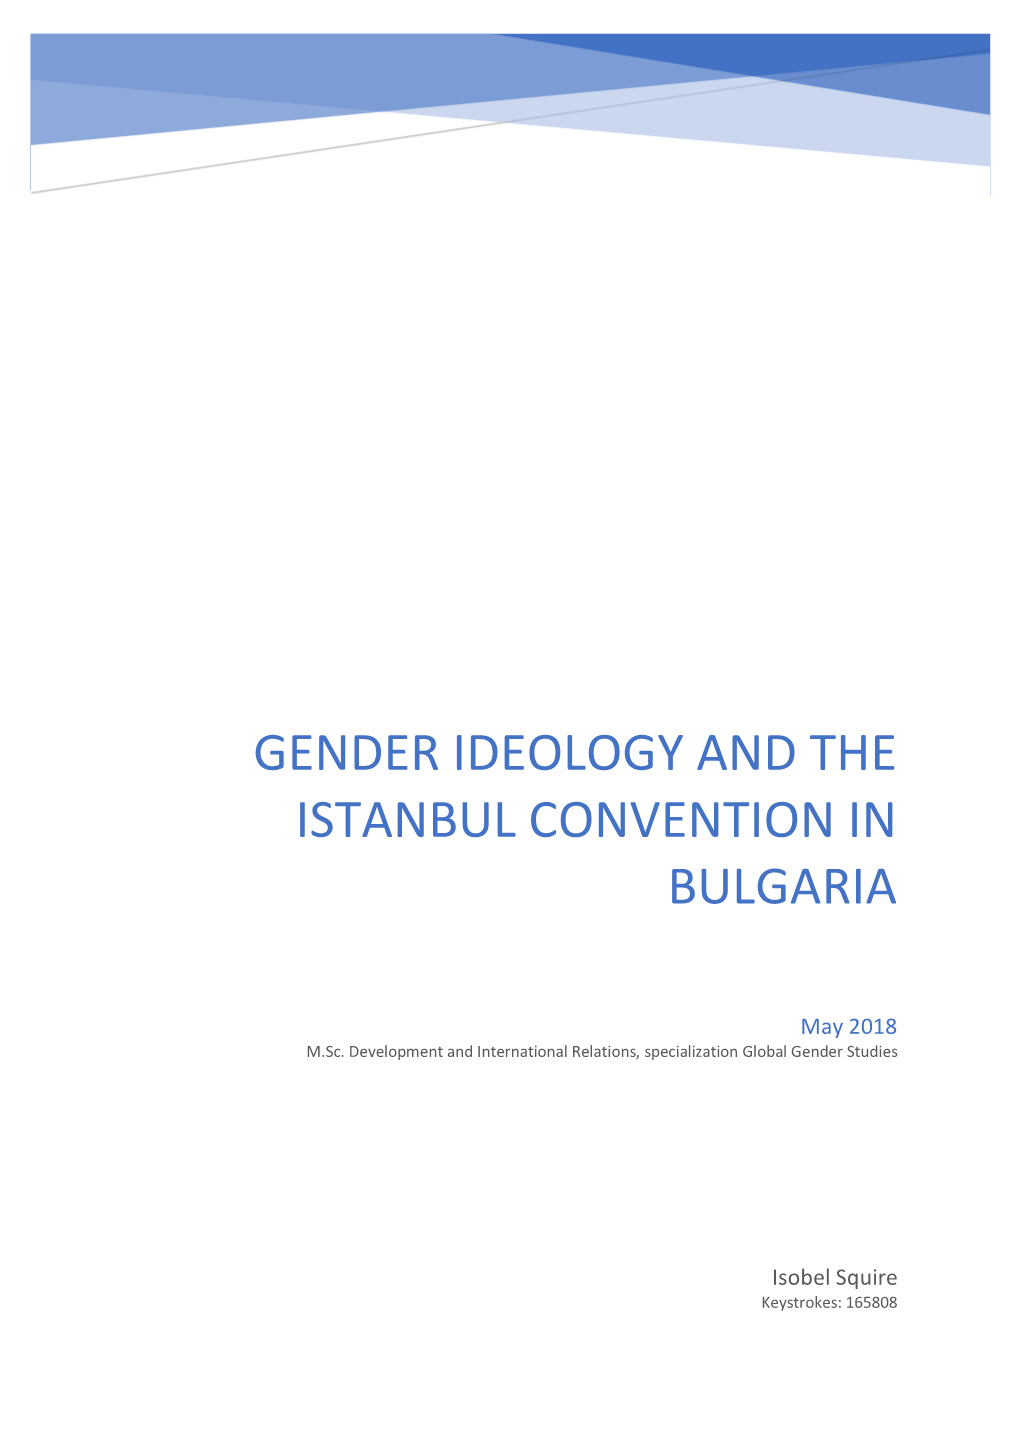 Gender Ideology and the Istanbul Convention in Bulgaria